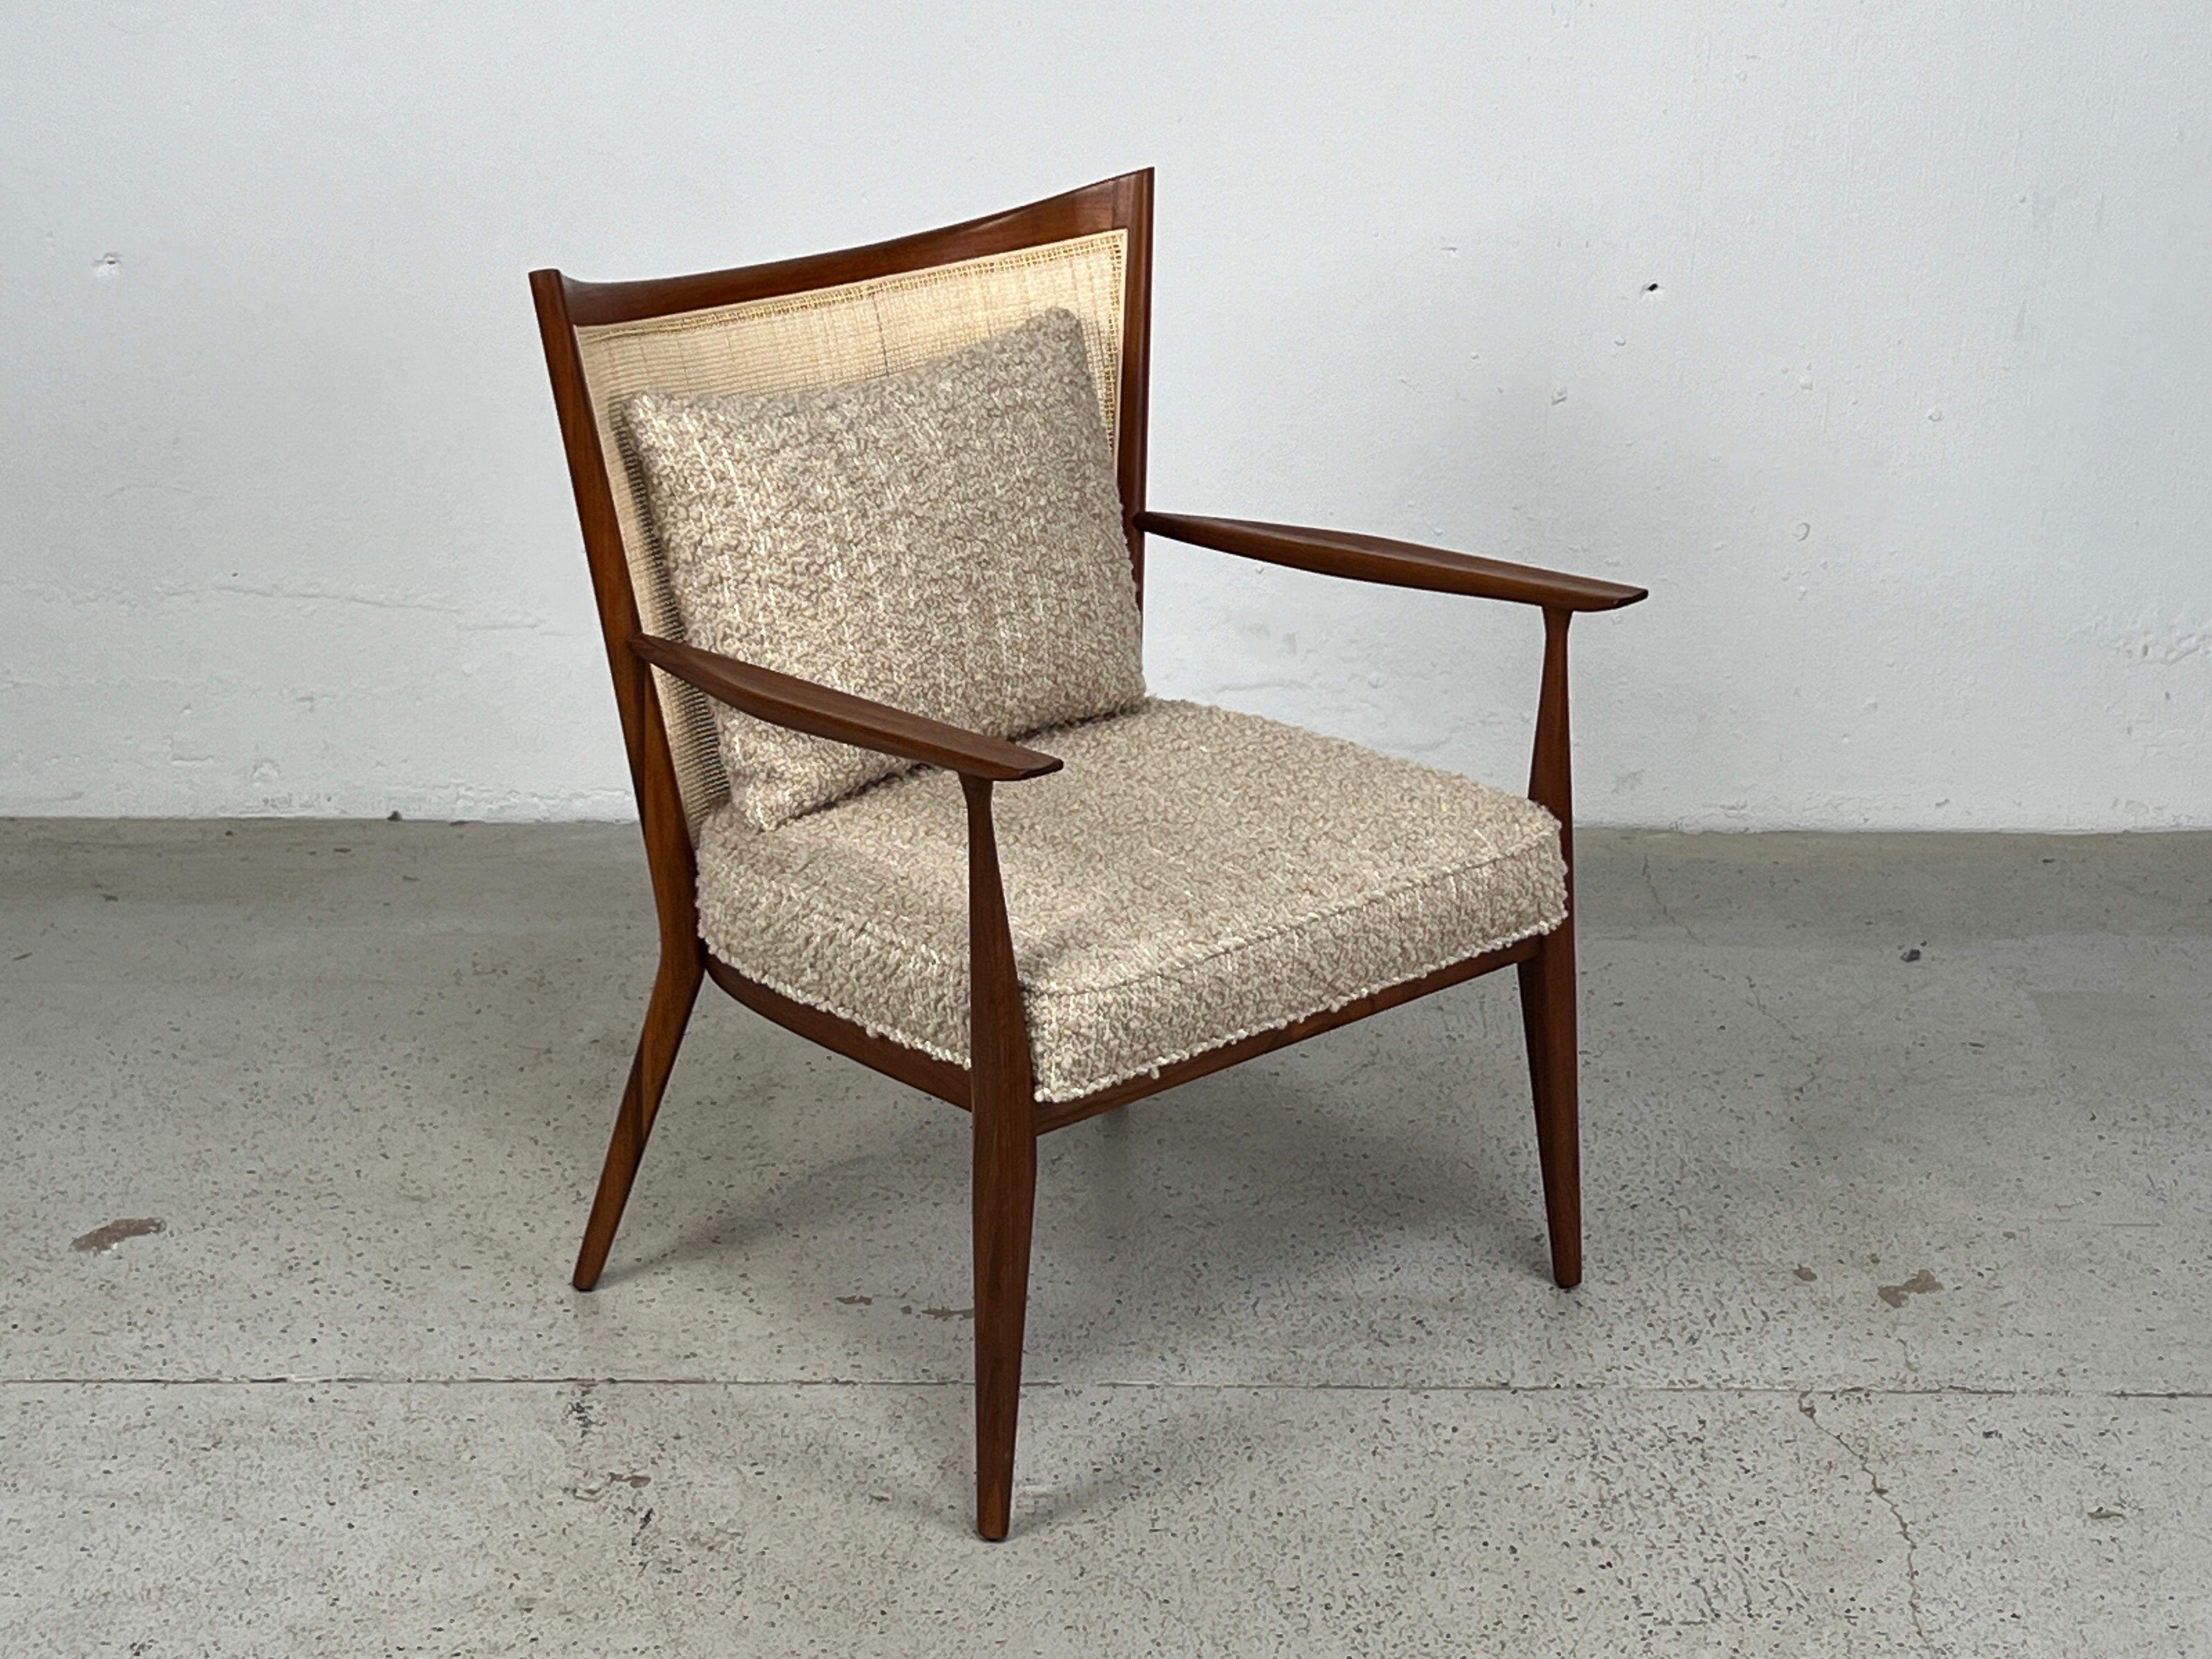 A walnut and cane lounge chair designed by Paul McCobb. Fully restored.